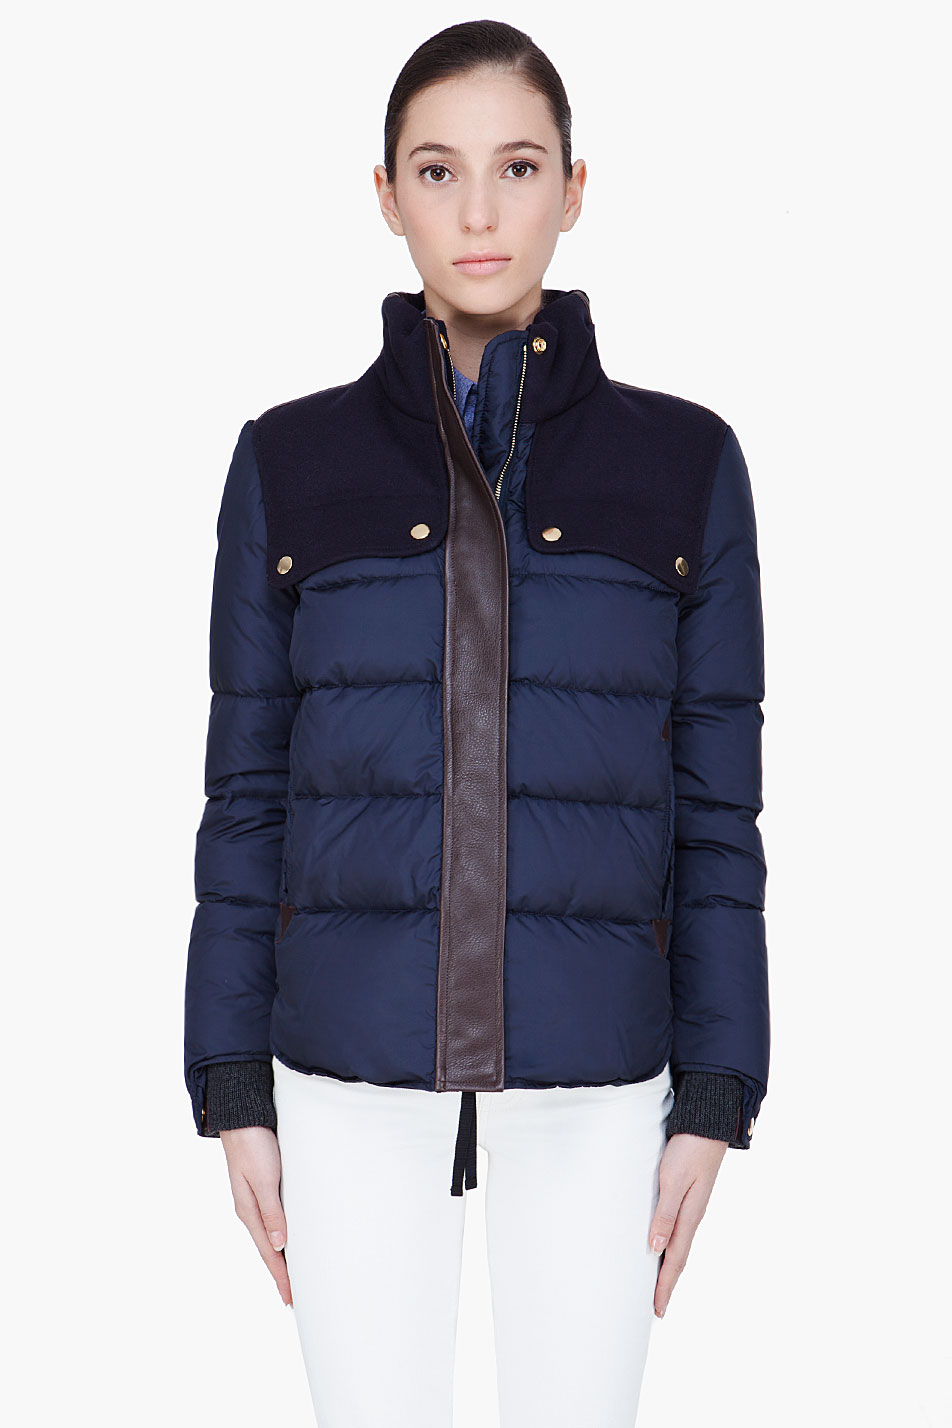 Marni Leather Trim Bomber Jacket in Blue | Lyst